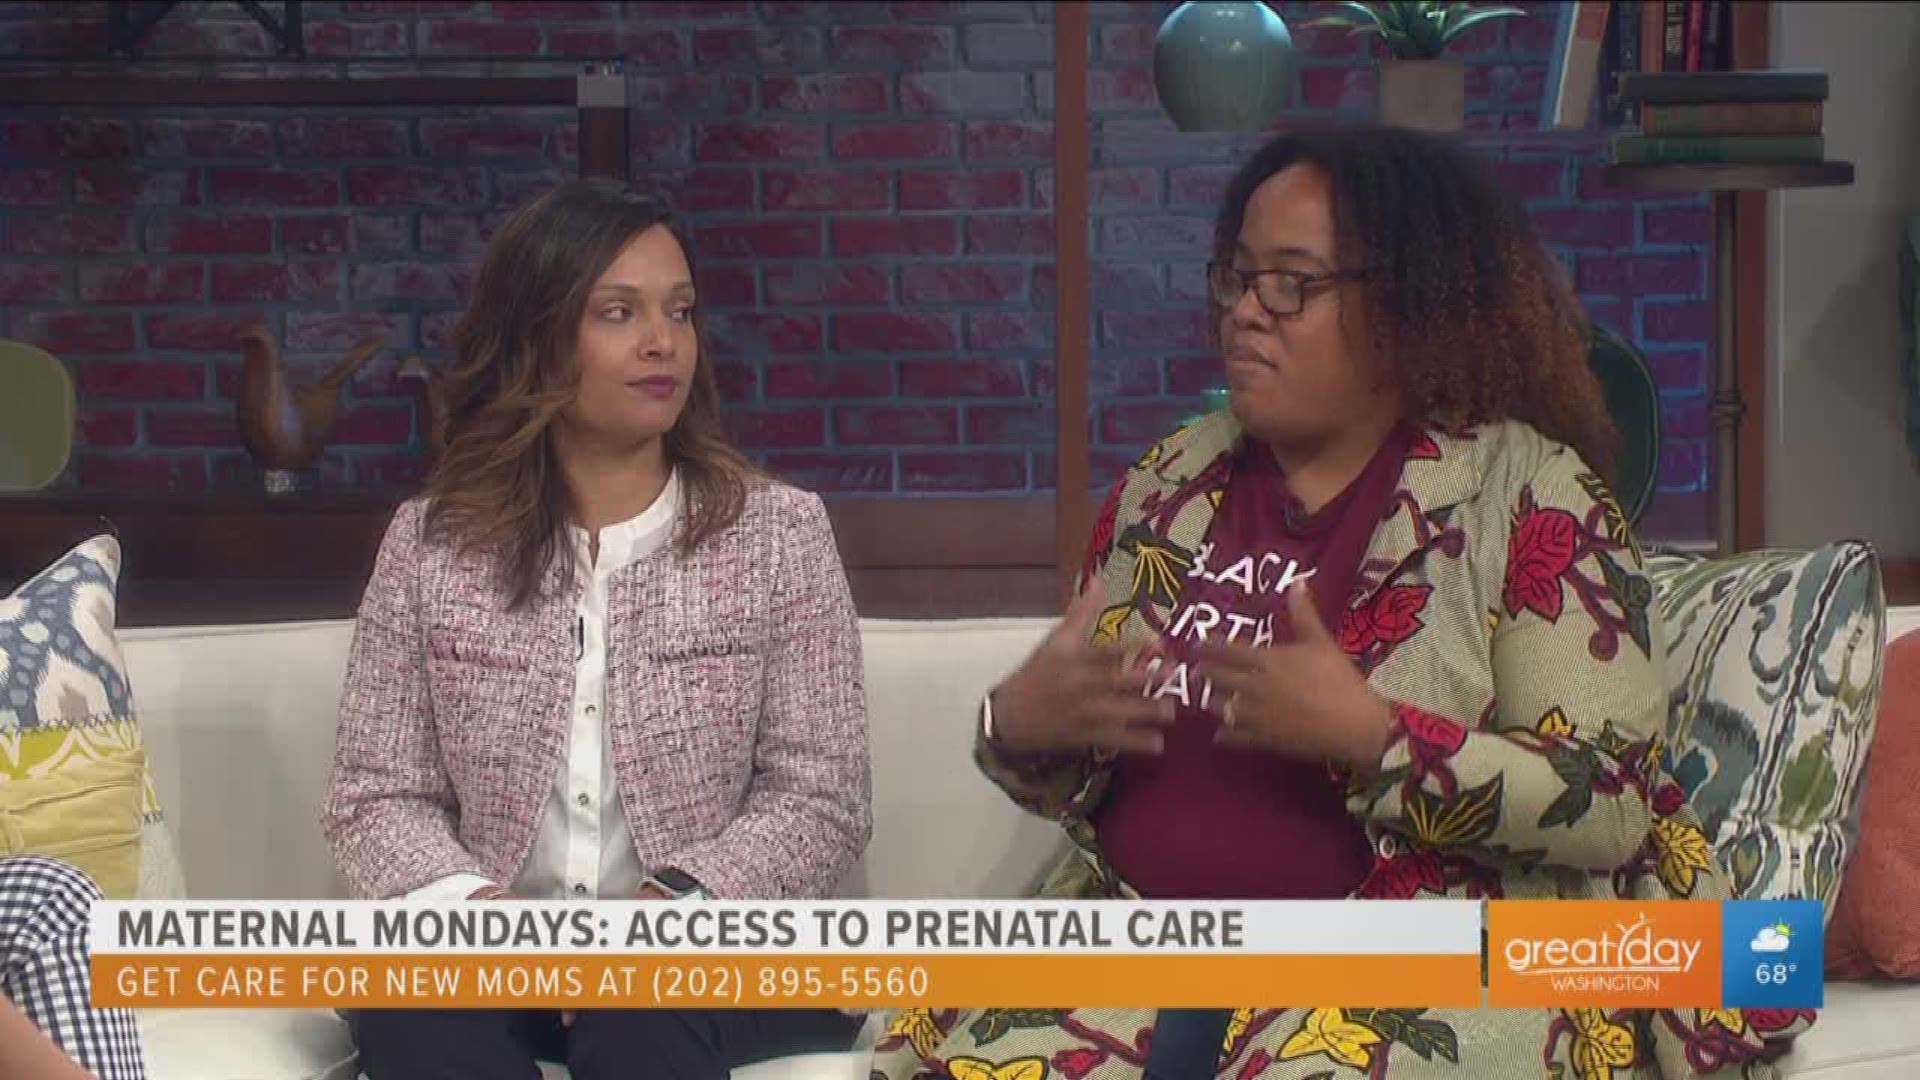 Access to prenatal care is very important and can be lifesaving.  Anjali Sharma of Aetna and Ebony Marcelle from Community of Hope explain their concerns for new moms and how prenatal care helps avoid potential problems.  This segment was sponsored by the DC Mayor's Office.